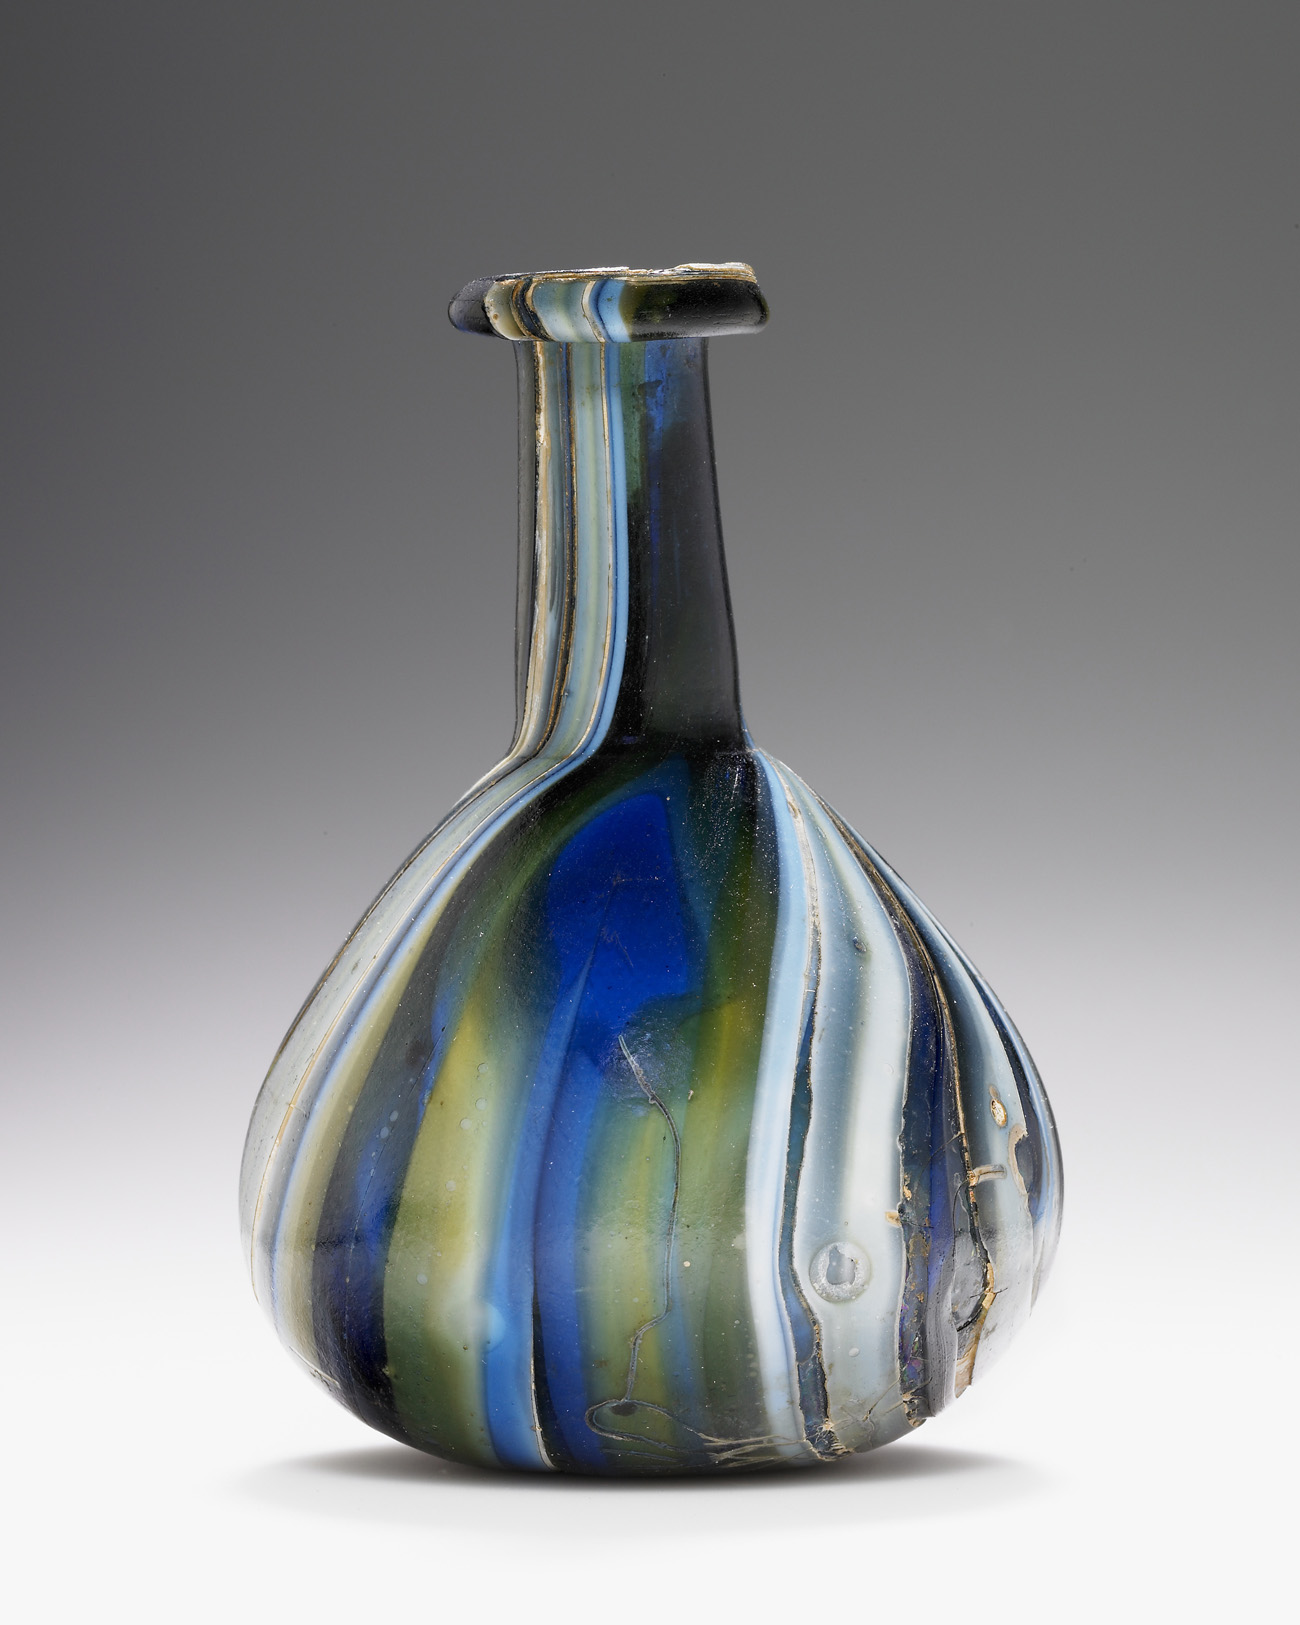 The Beauty of Greek and Roman Glass